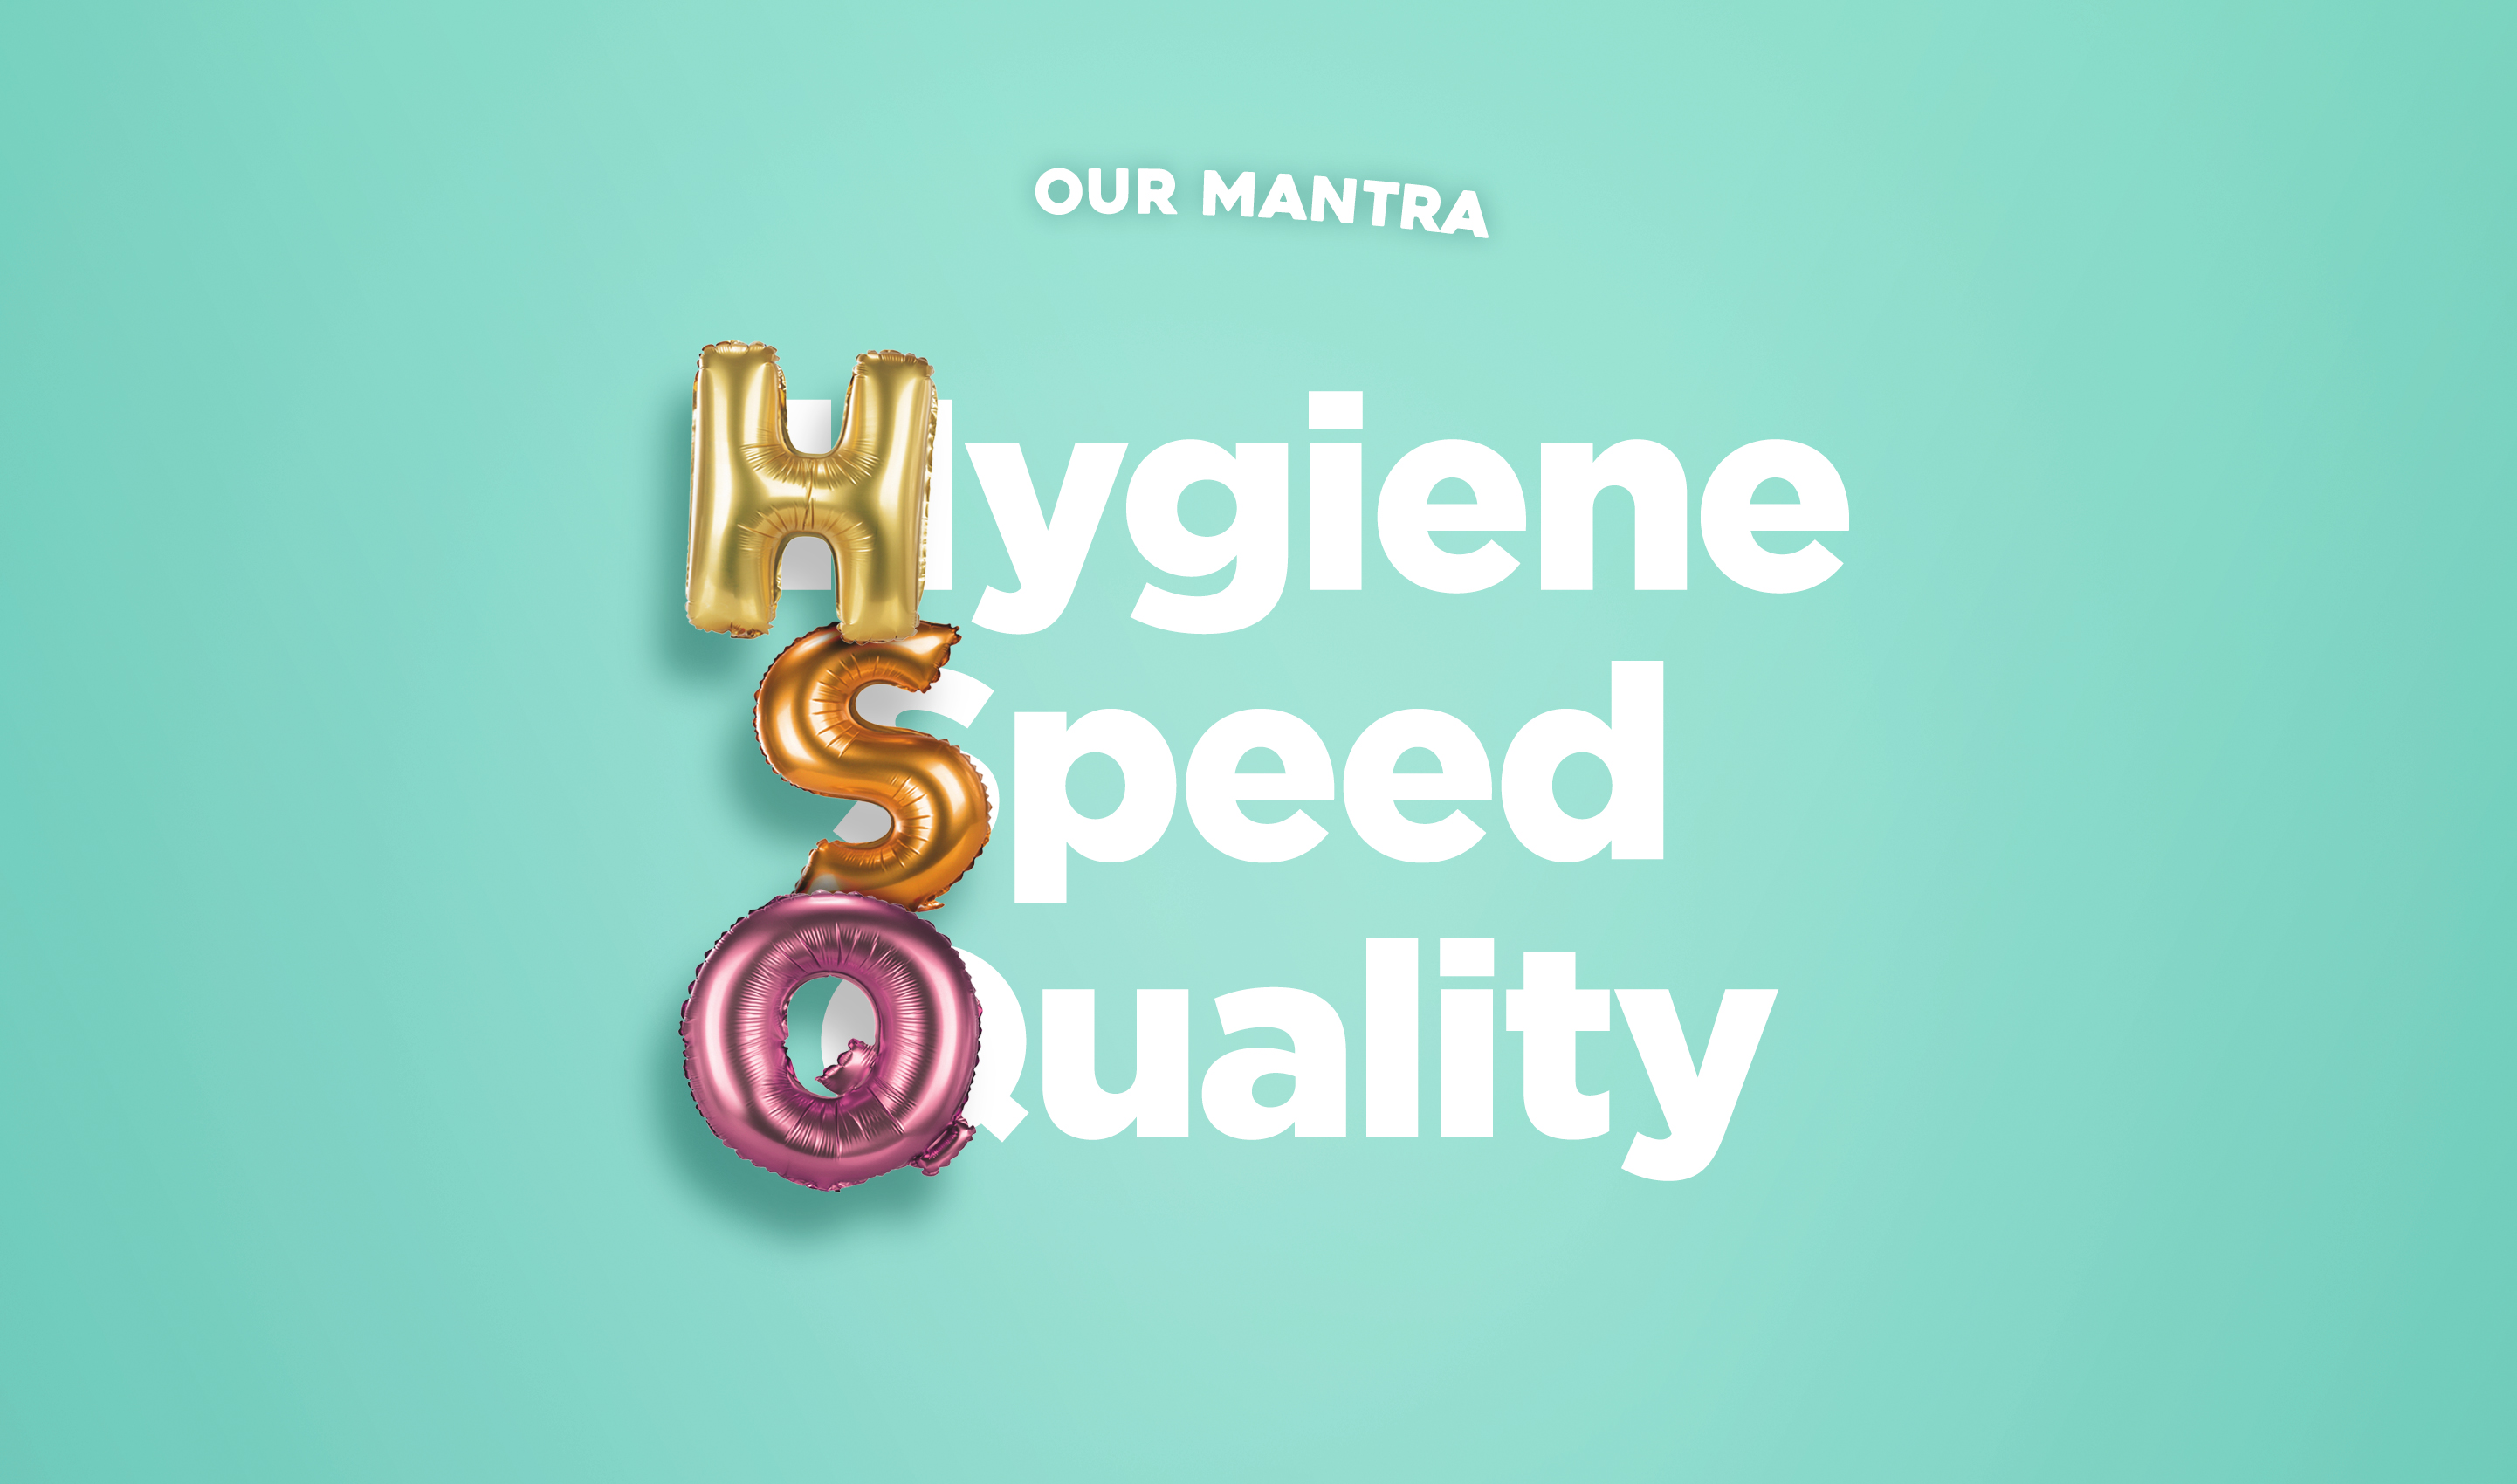 Our Mantra : Hygiene Speed Quality